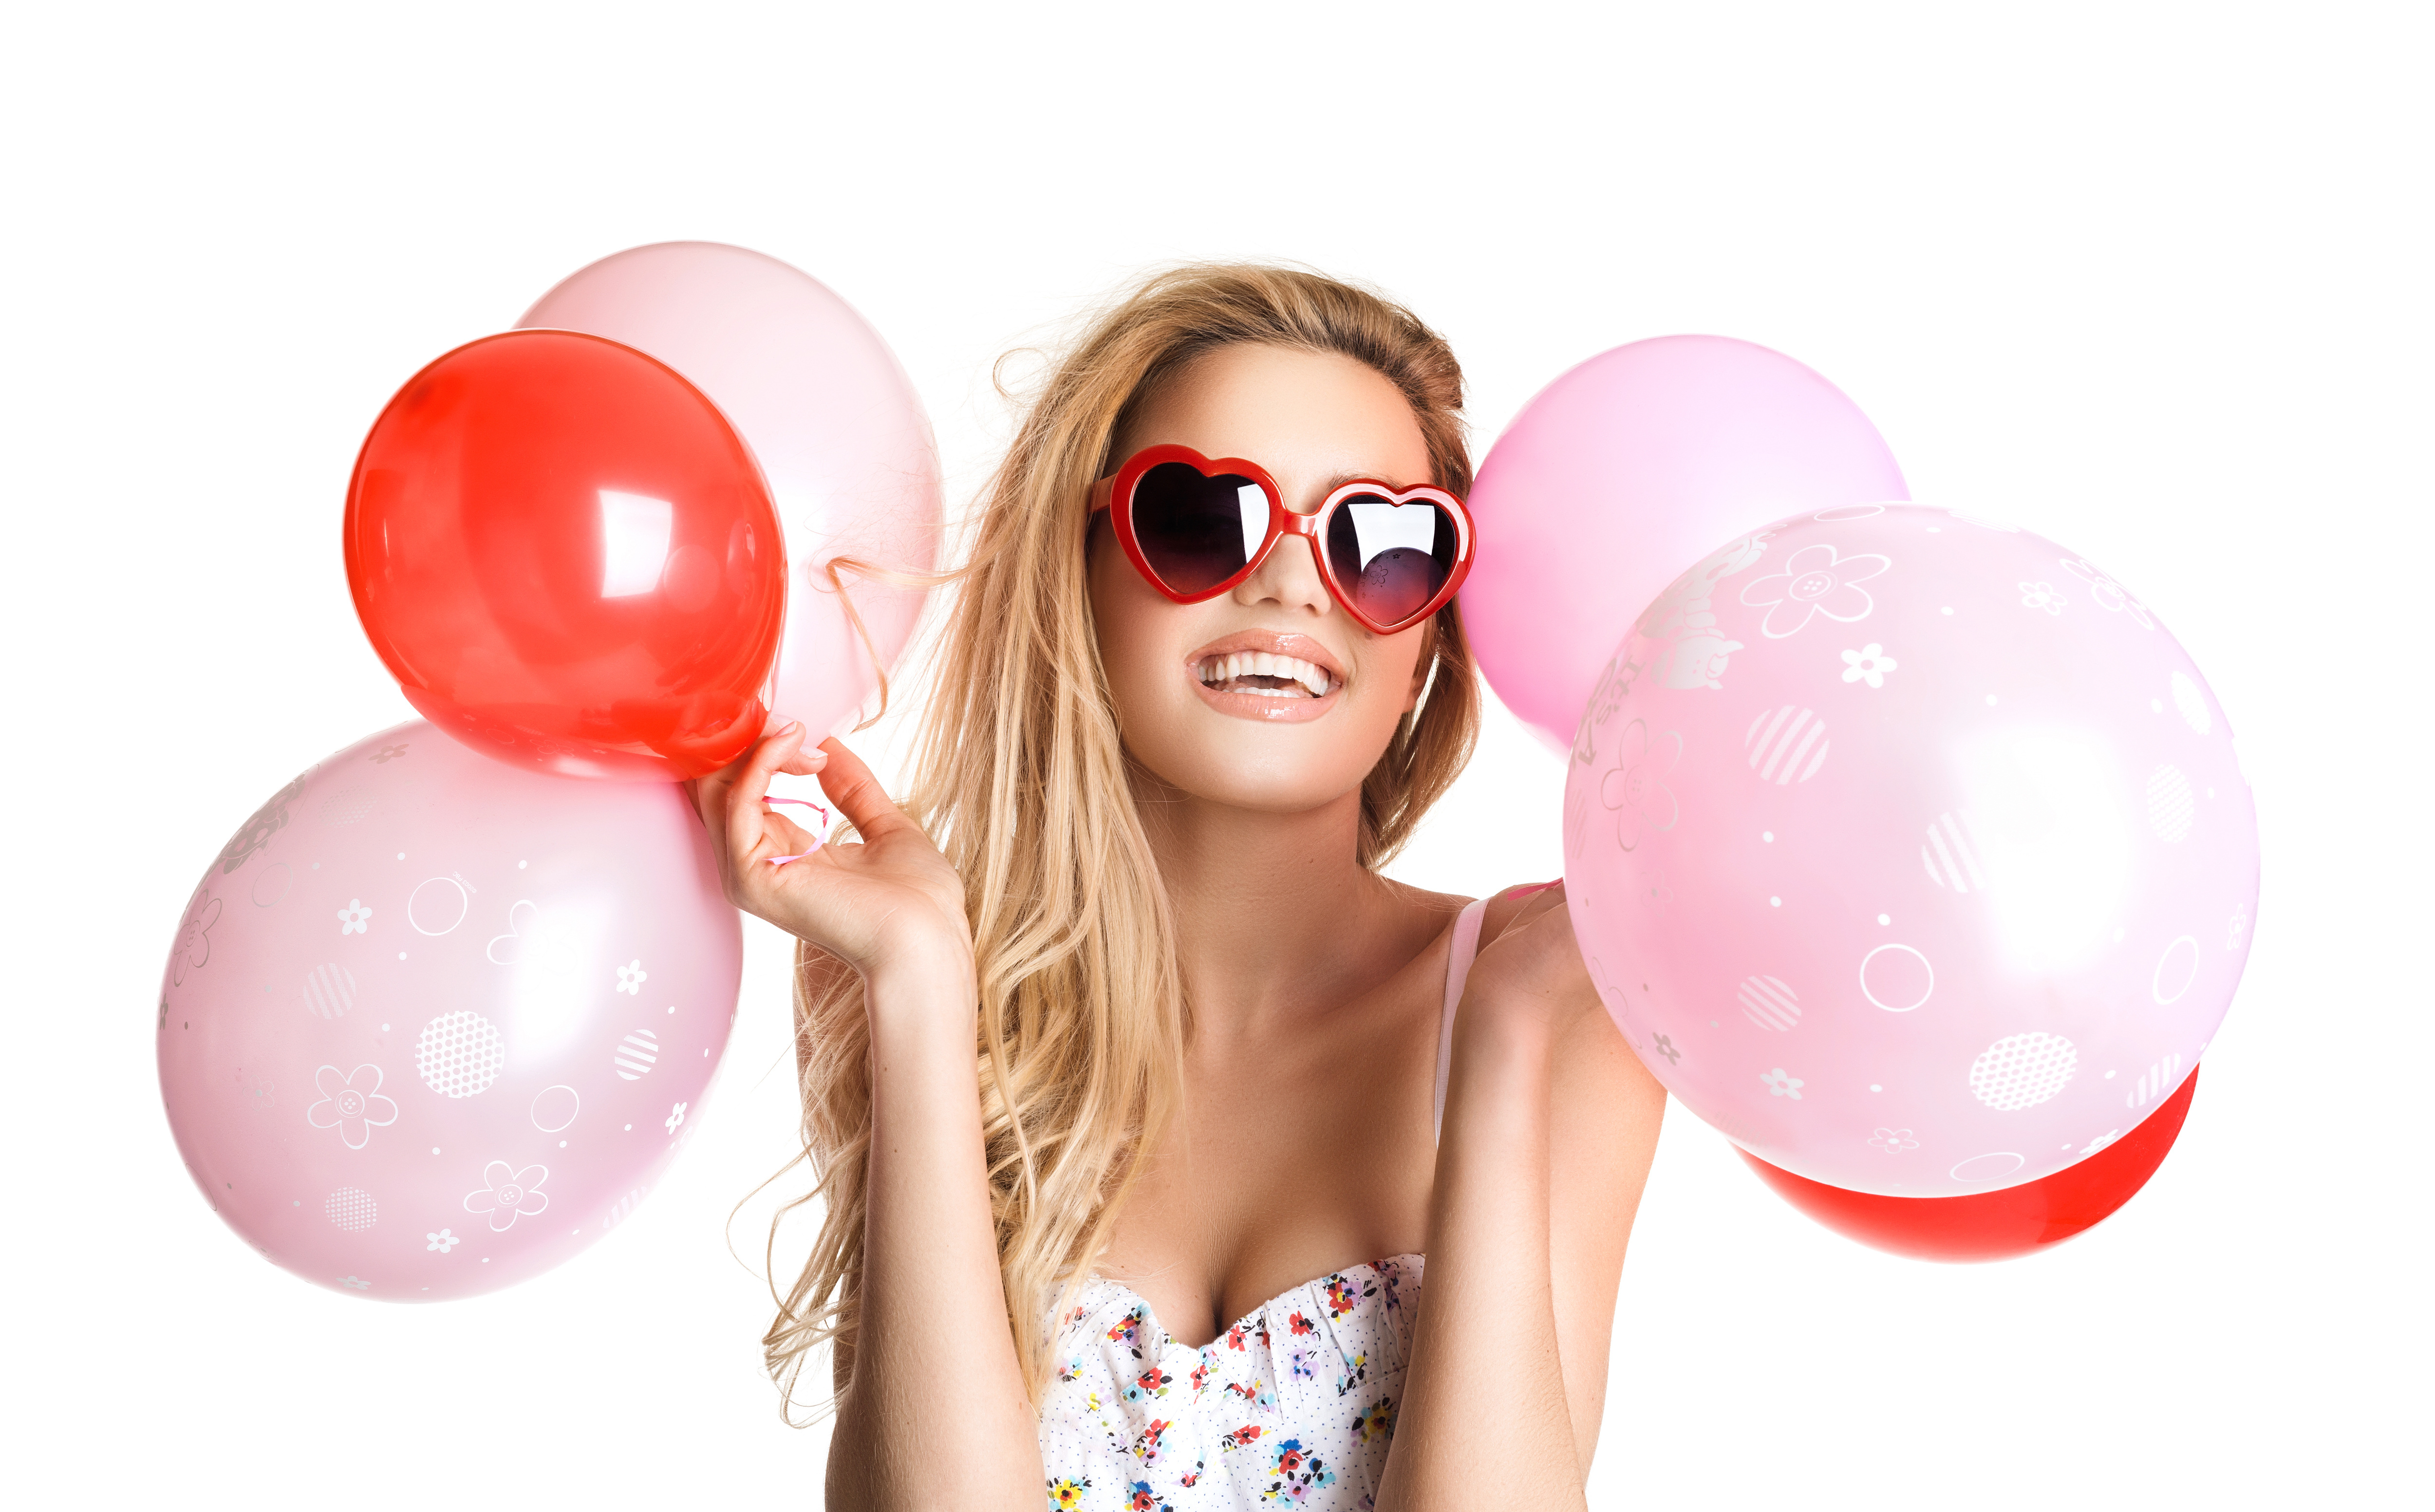 People Model Depth Of Field Women With Glasses Balloon Party Balloons 5000x3105